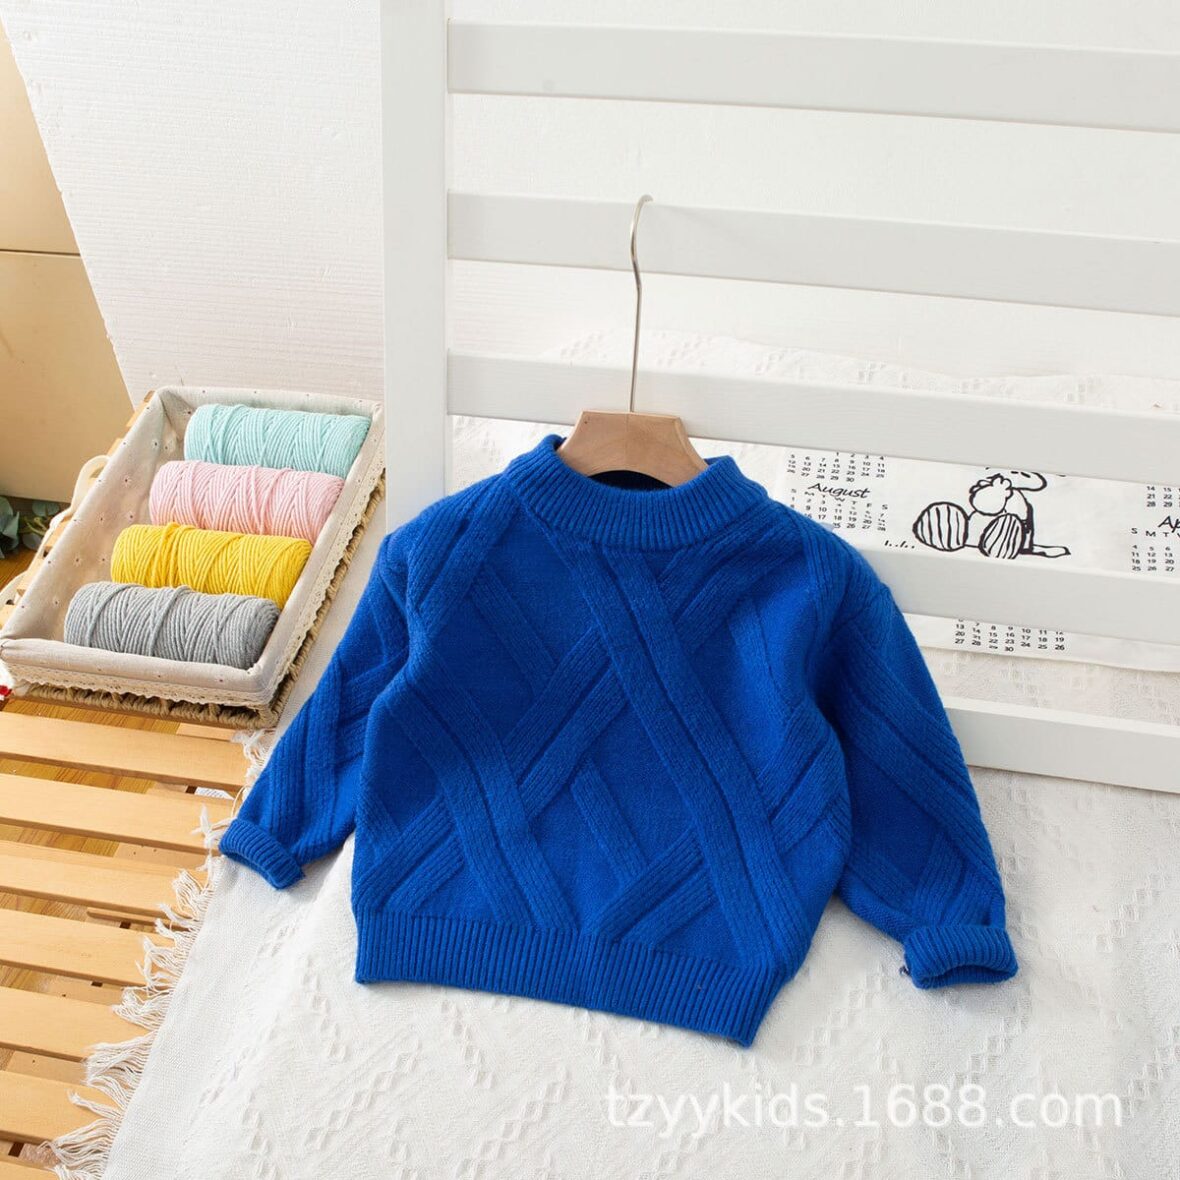 Blue Knitted Sweater sweat Top For Toddlers Boys And Girls